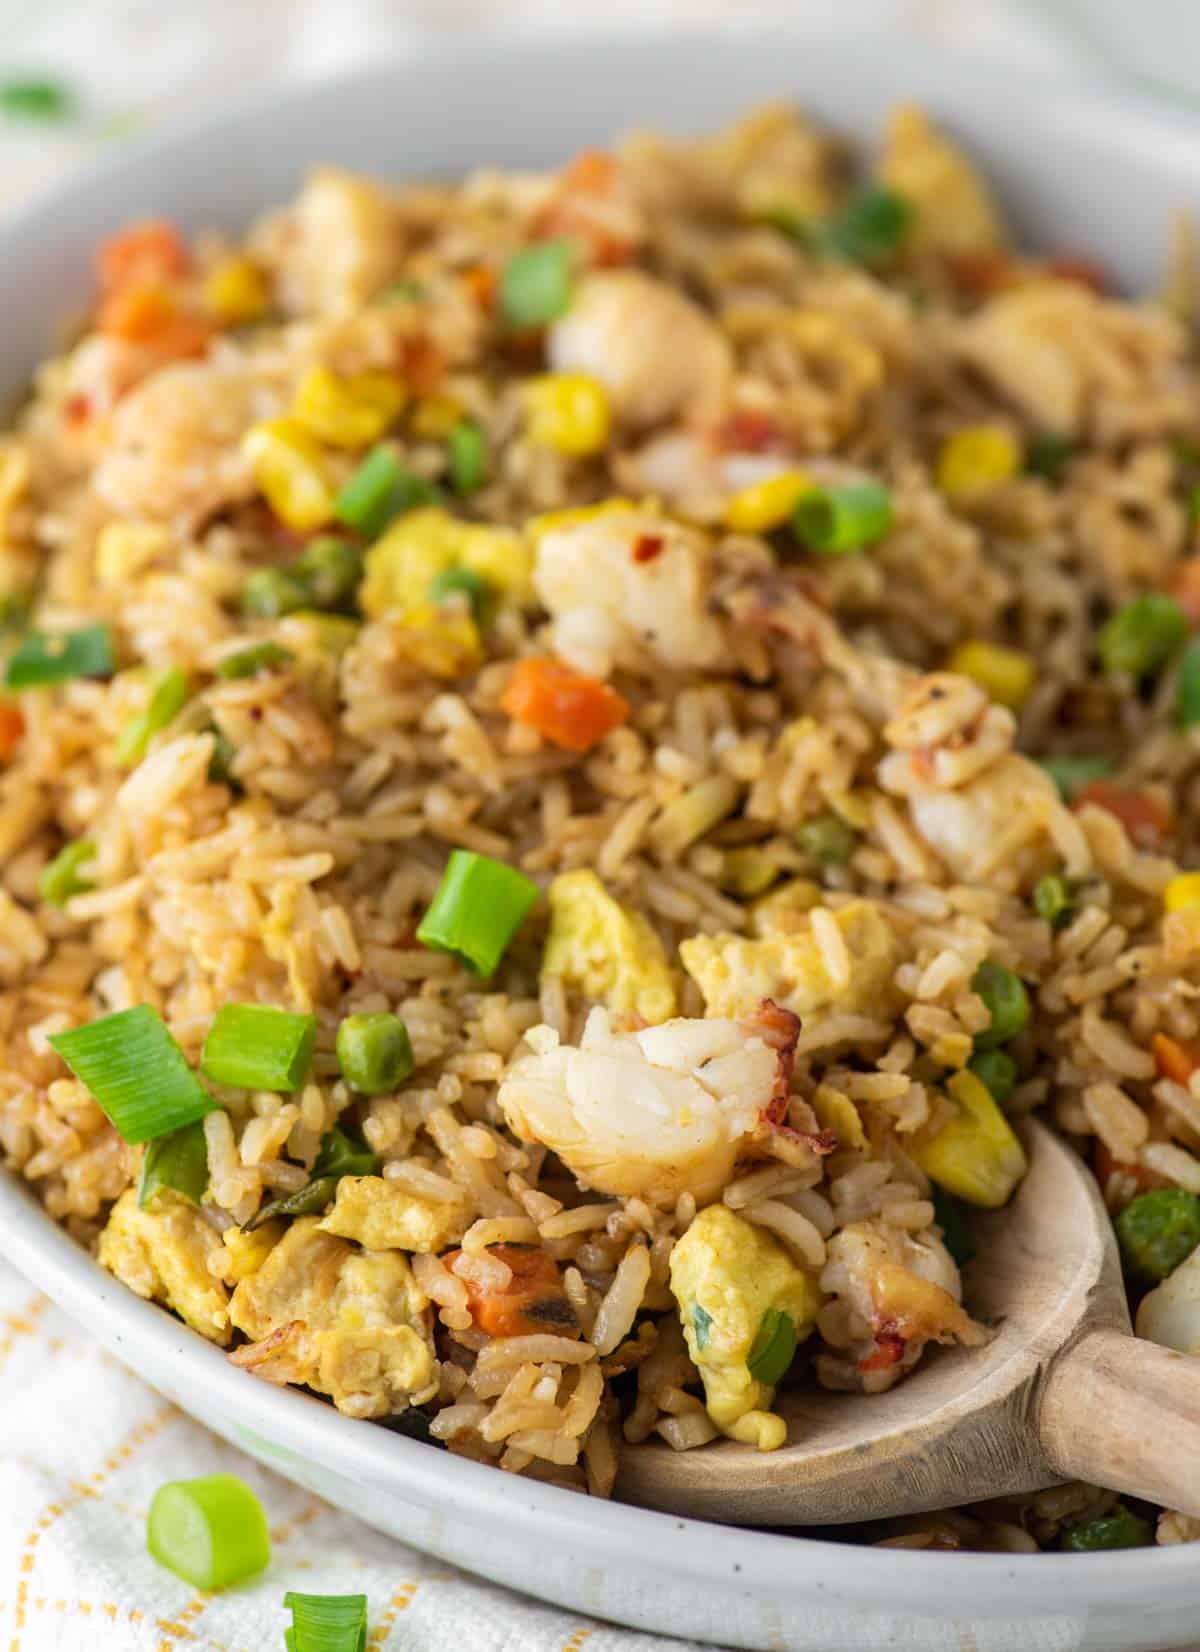 wooden spoon dipped into bowl of lobster fried rice